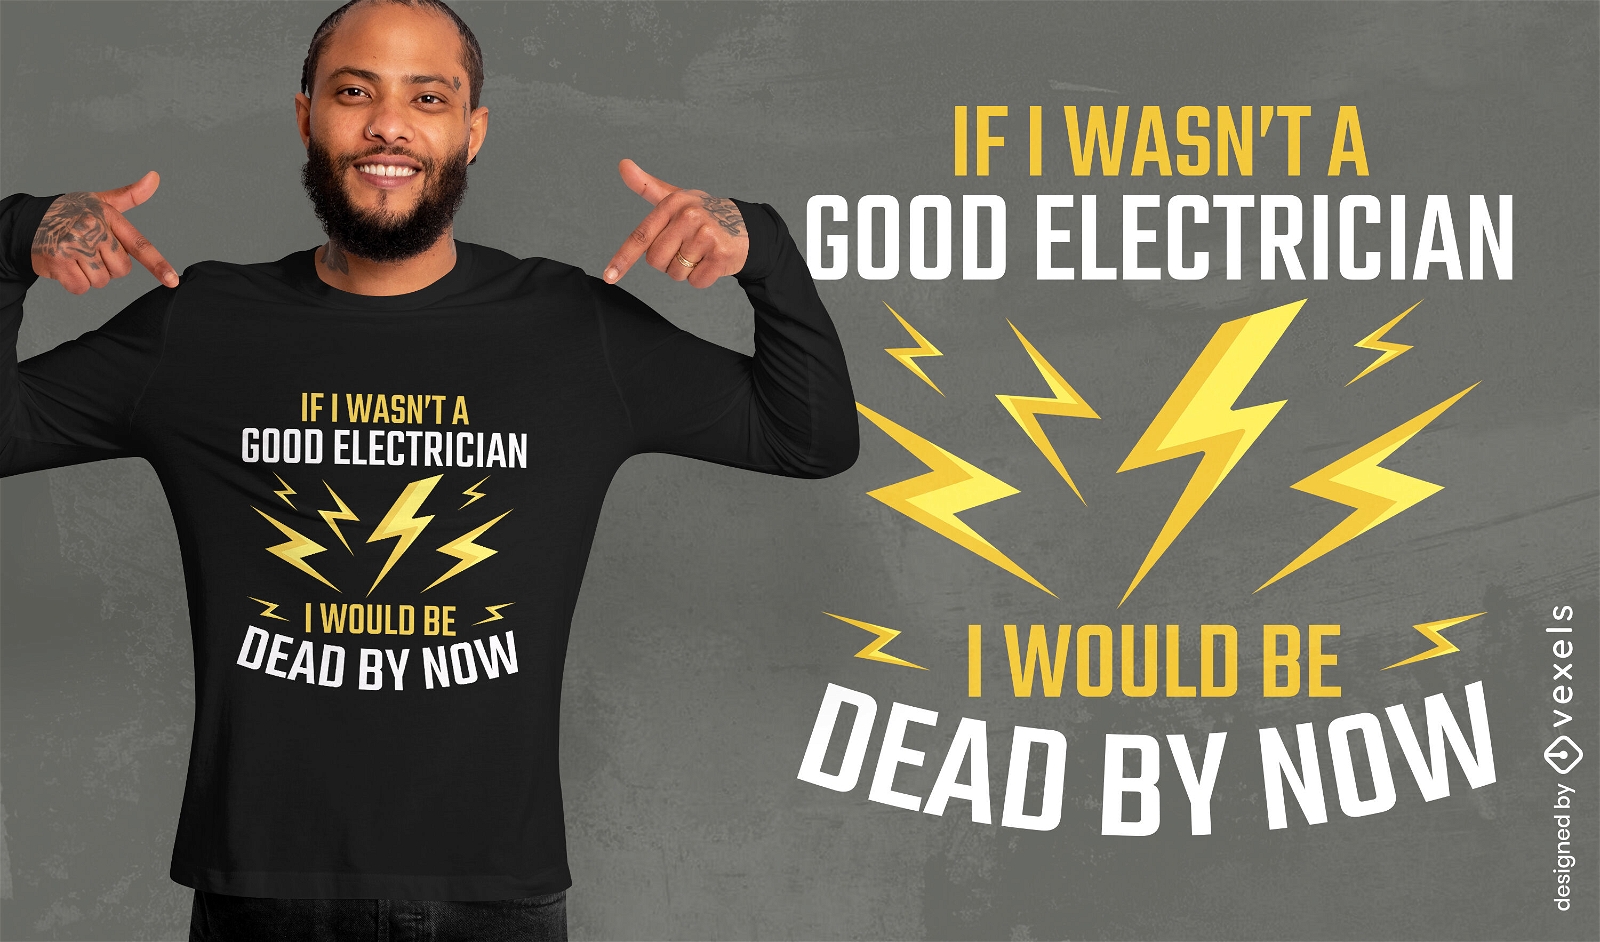 Good electrician quote t-shirt design